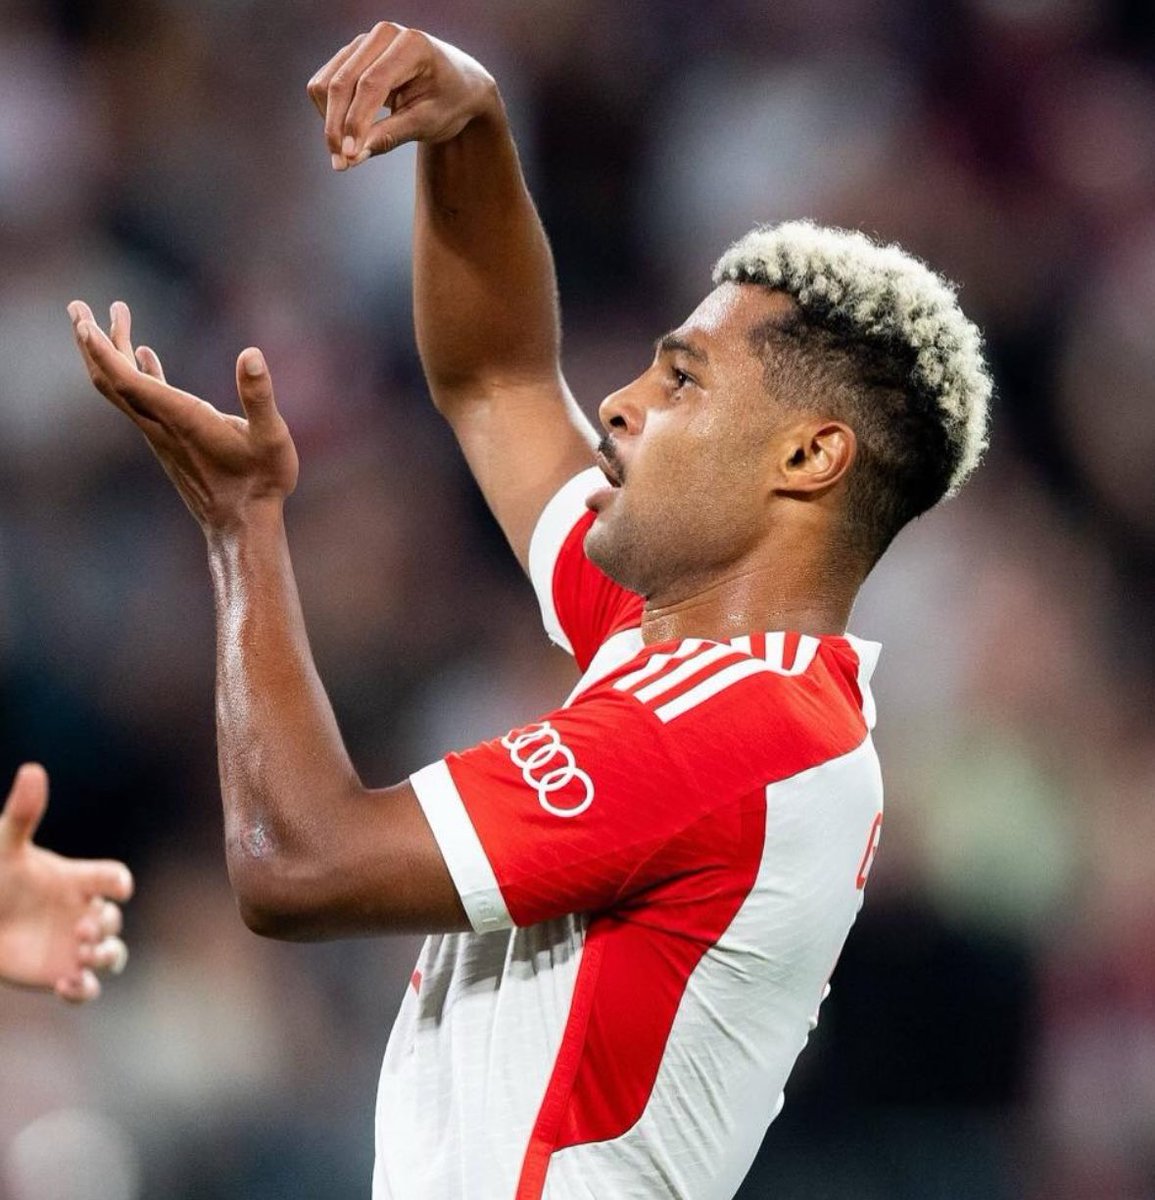 Bayern confirm that Serge David Gnabry has sustained a hamstring strain against Arsenal. The German winger will be sidelined for the time being.